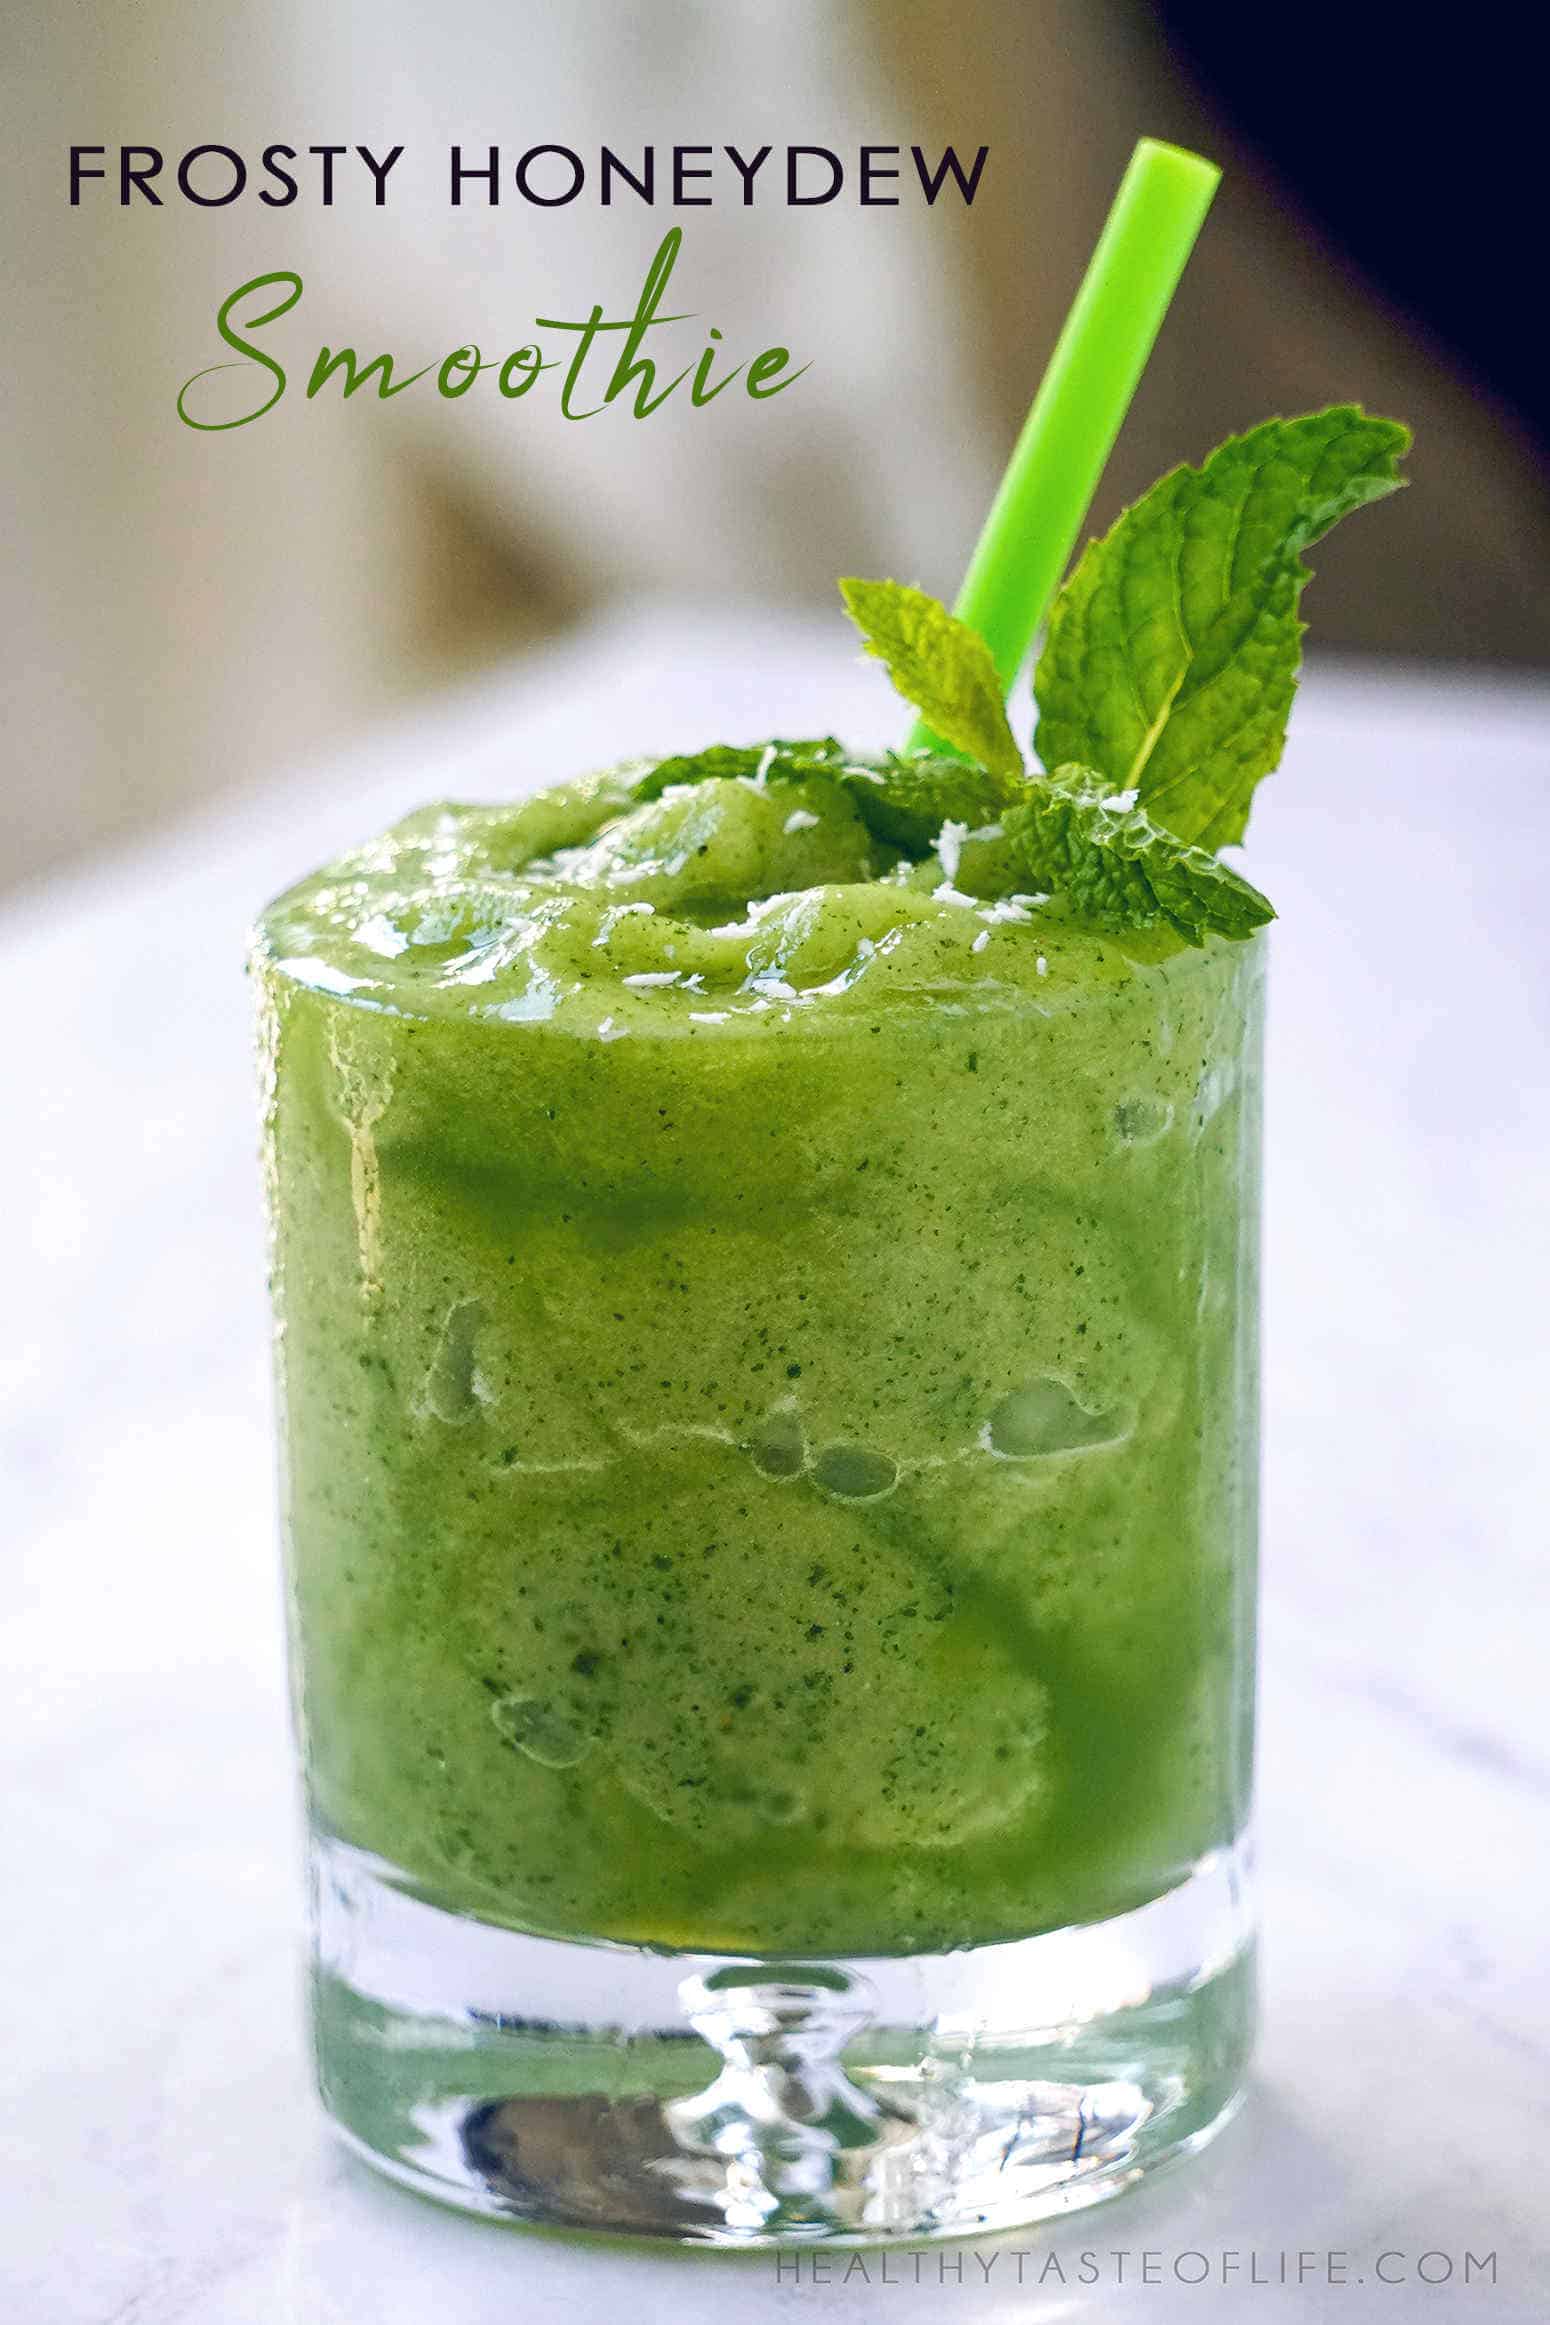 Honeydew Smoothie (Slush)  A Refreshing Summer Drink recipe made with honeydew melon and mint leaves.